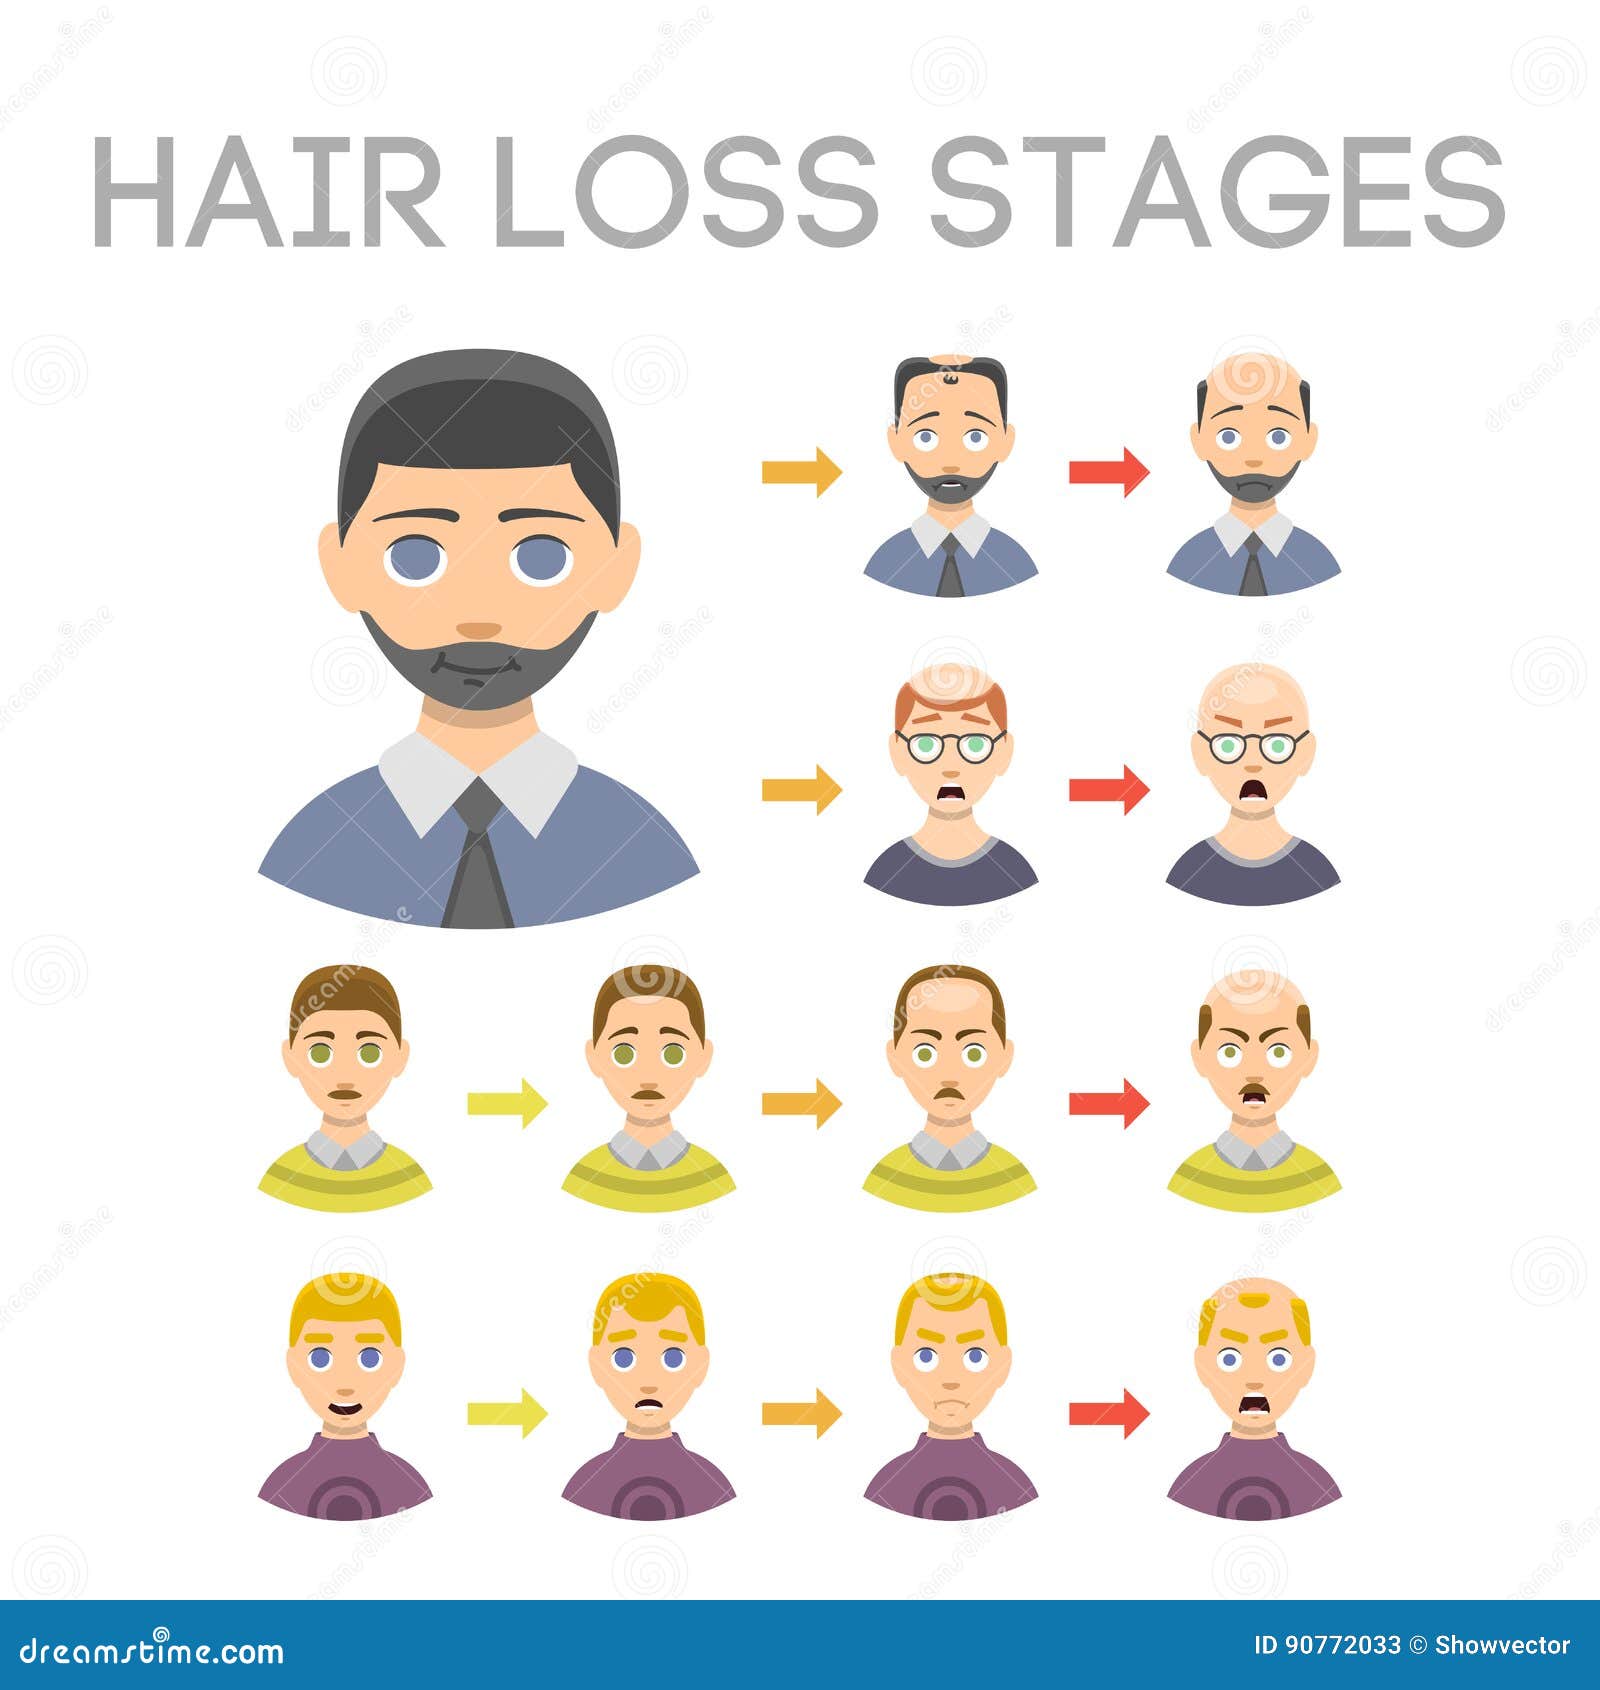 Farjo Hair Institute  Do you know the types of Male Pattern Baldness Read  more here httpswwwfarjocomabouthairlossmalepatternbaldness   Facebook